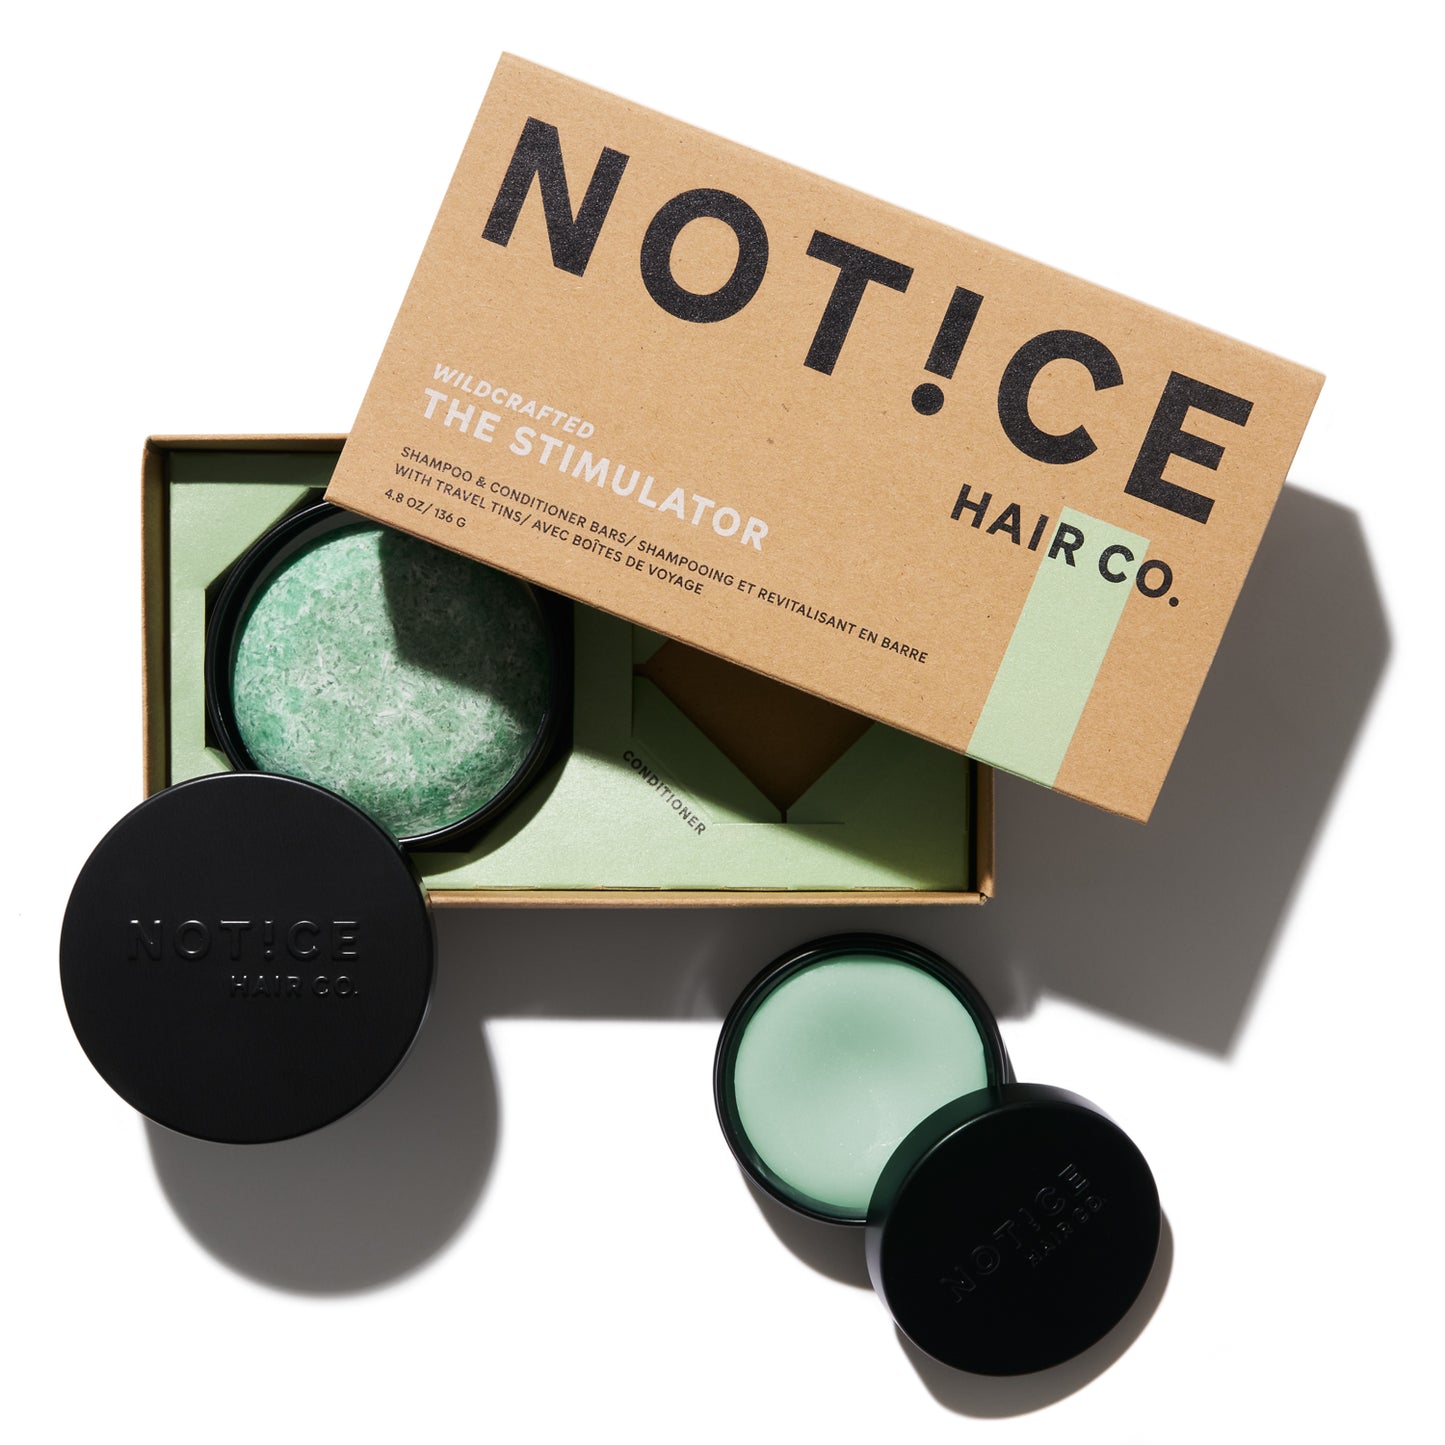 Shampoo/Conditioner Bar Travel Sets by NOT!CE Hair Co.